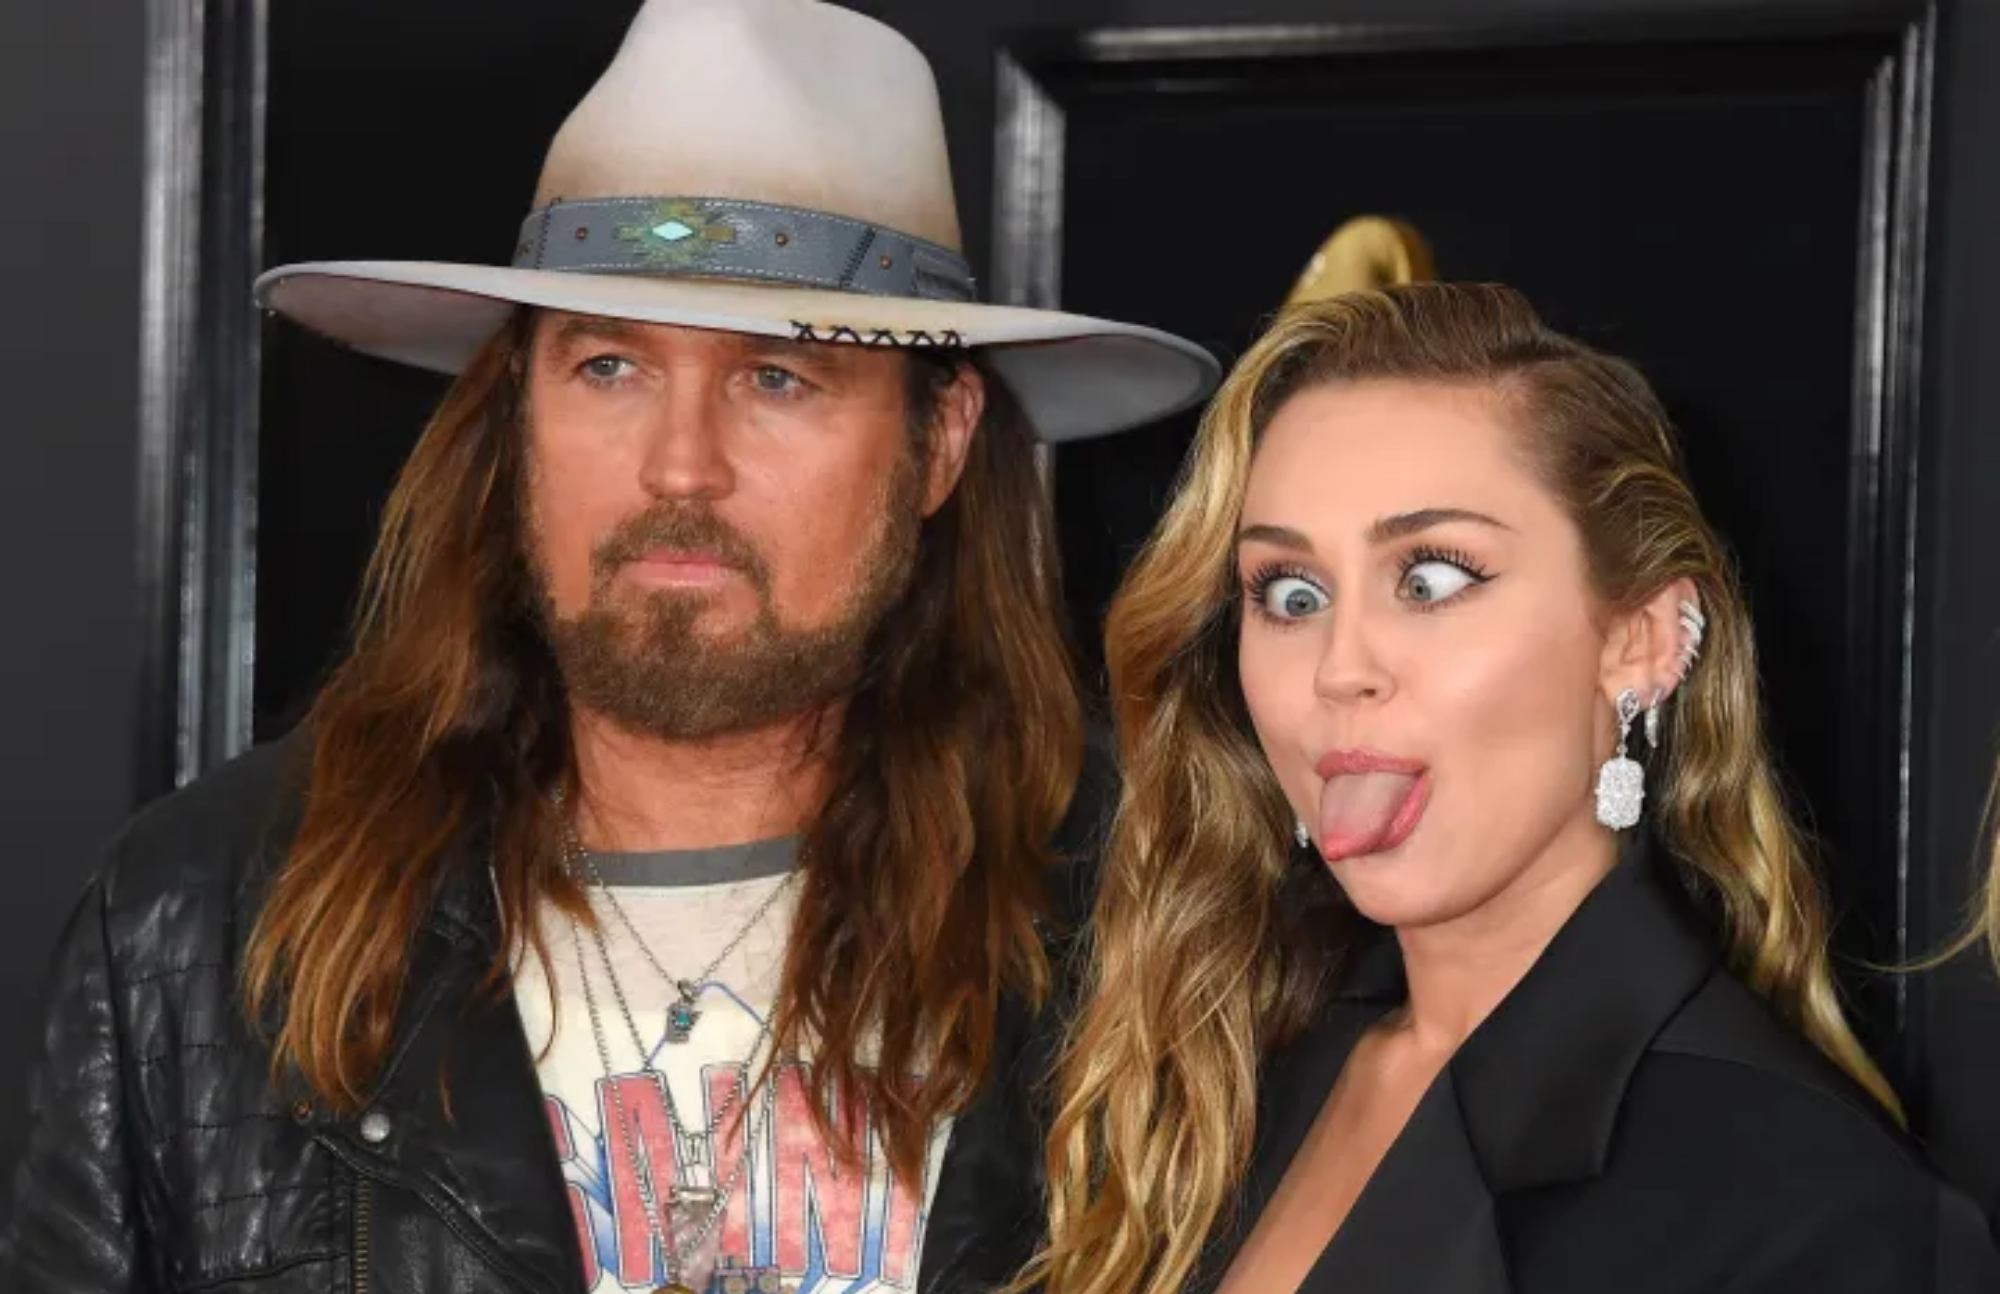 Miley Cyrus wacky pose with her father Billy Ray Cyrus wearing a cowboy hat